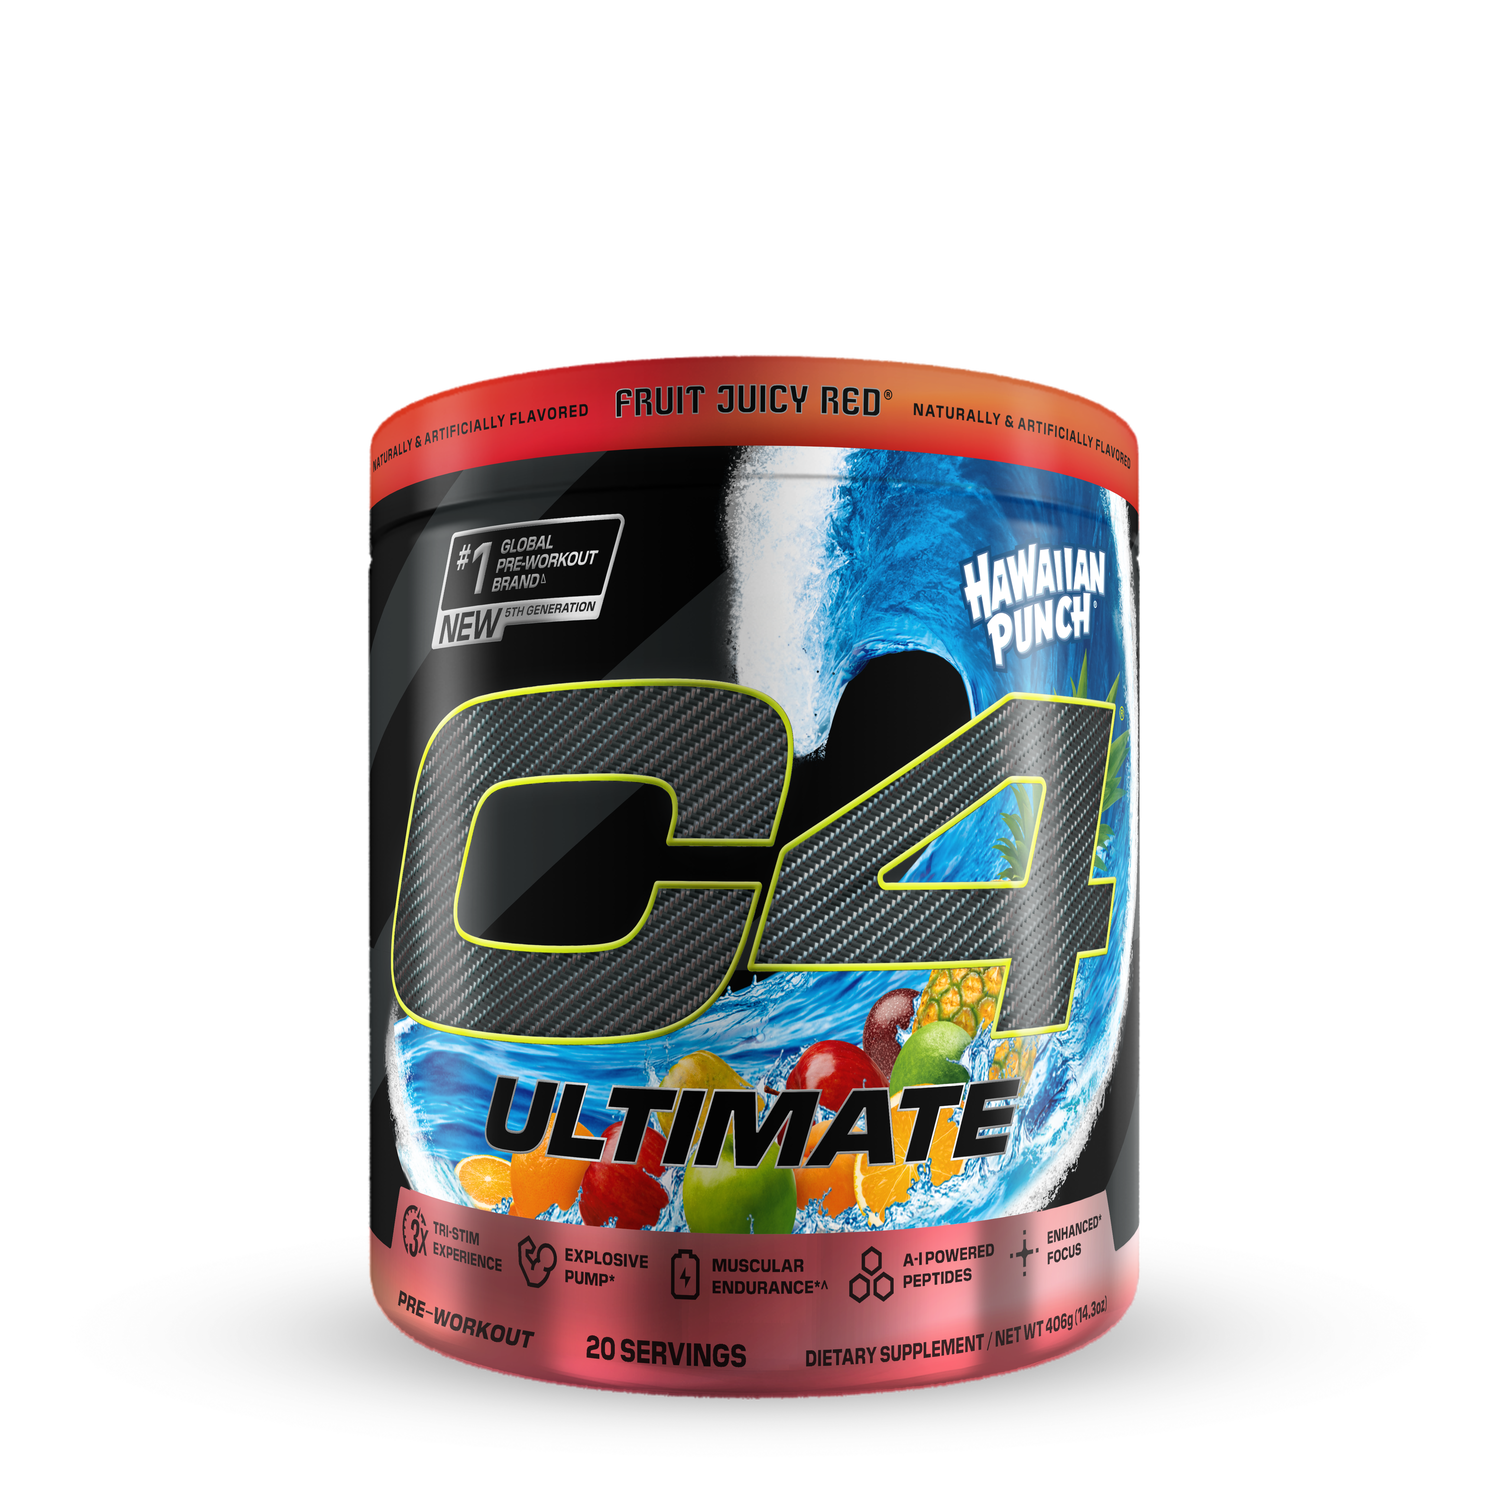 Cellucor C4 Ultimate Pre-Workout - Hawaiian Punch (20 Servings)